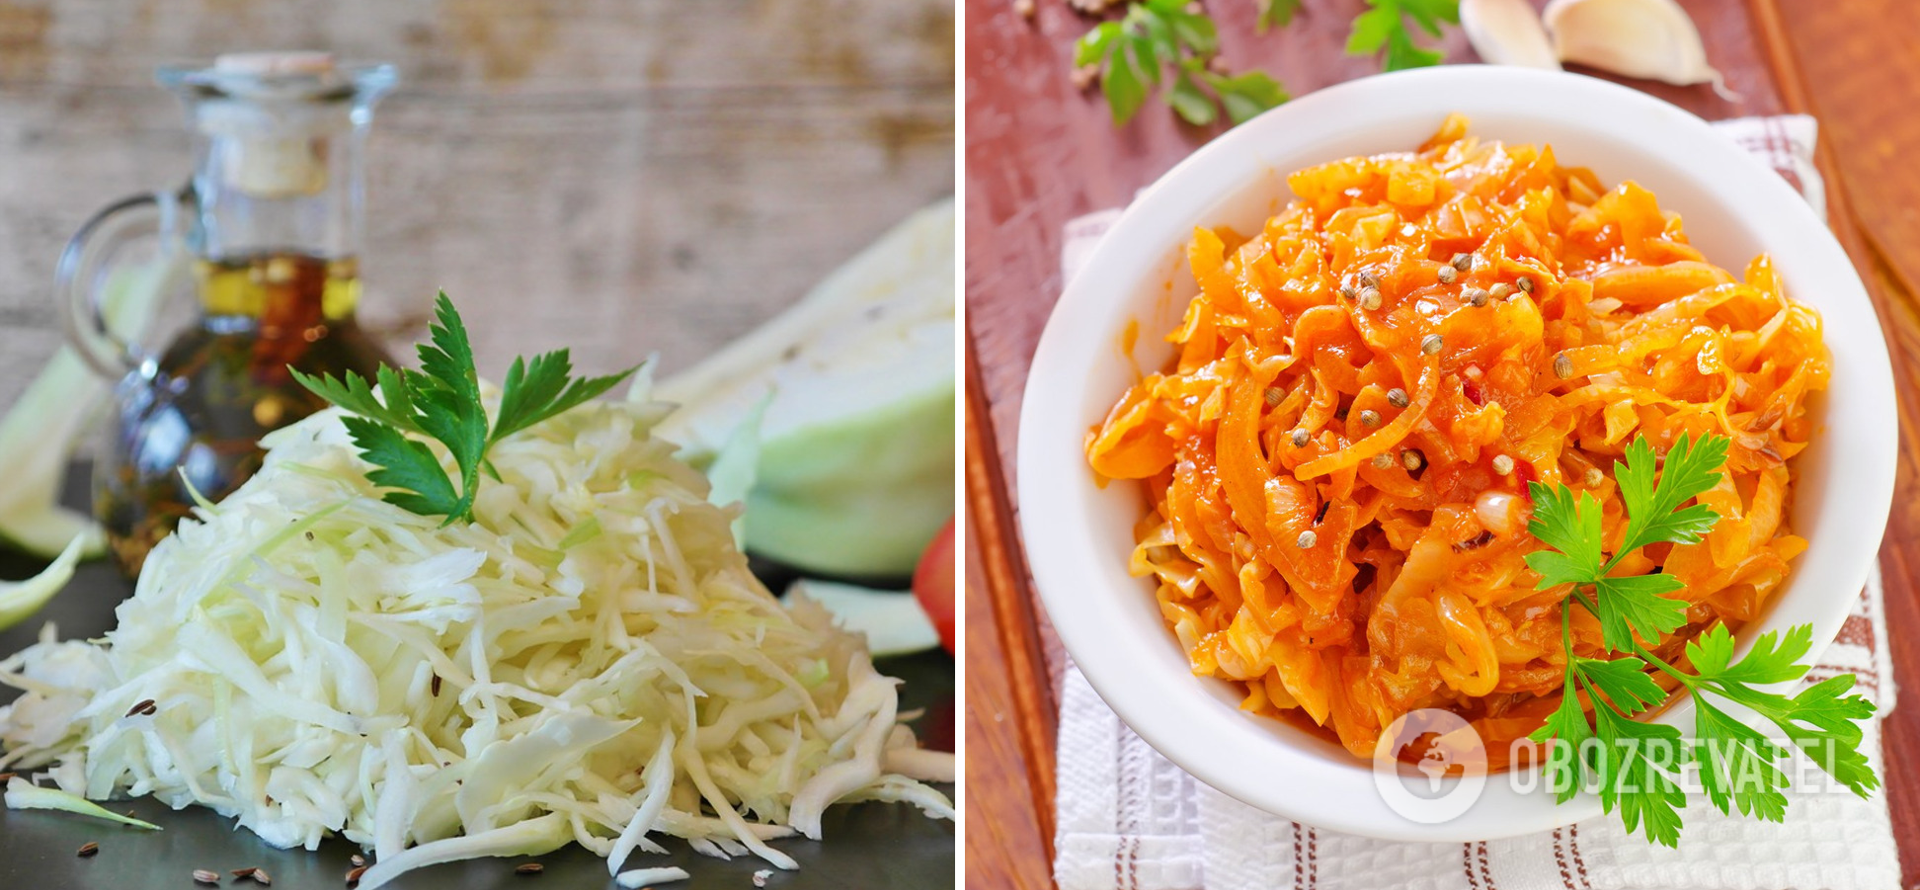 How to cook stewed cabbage deliciously